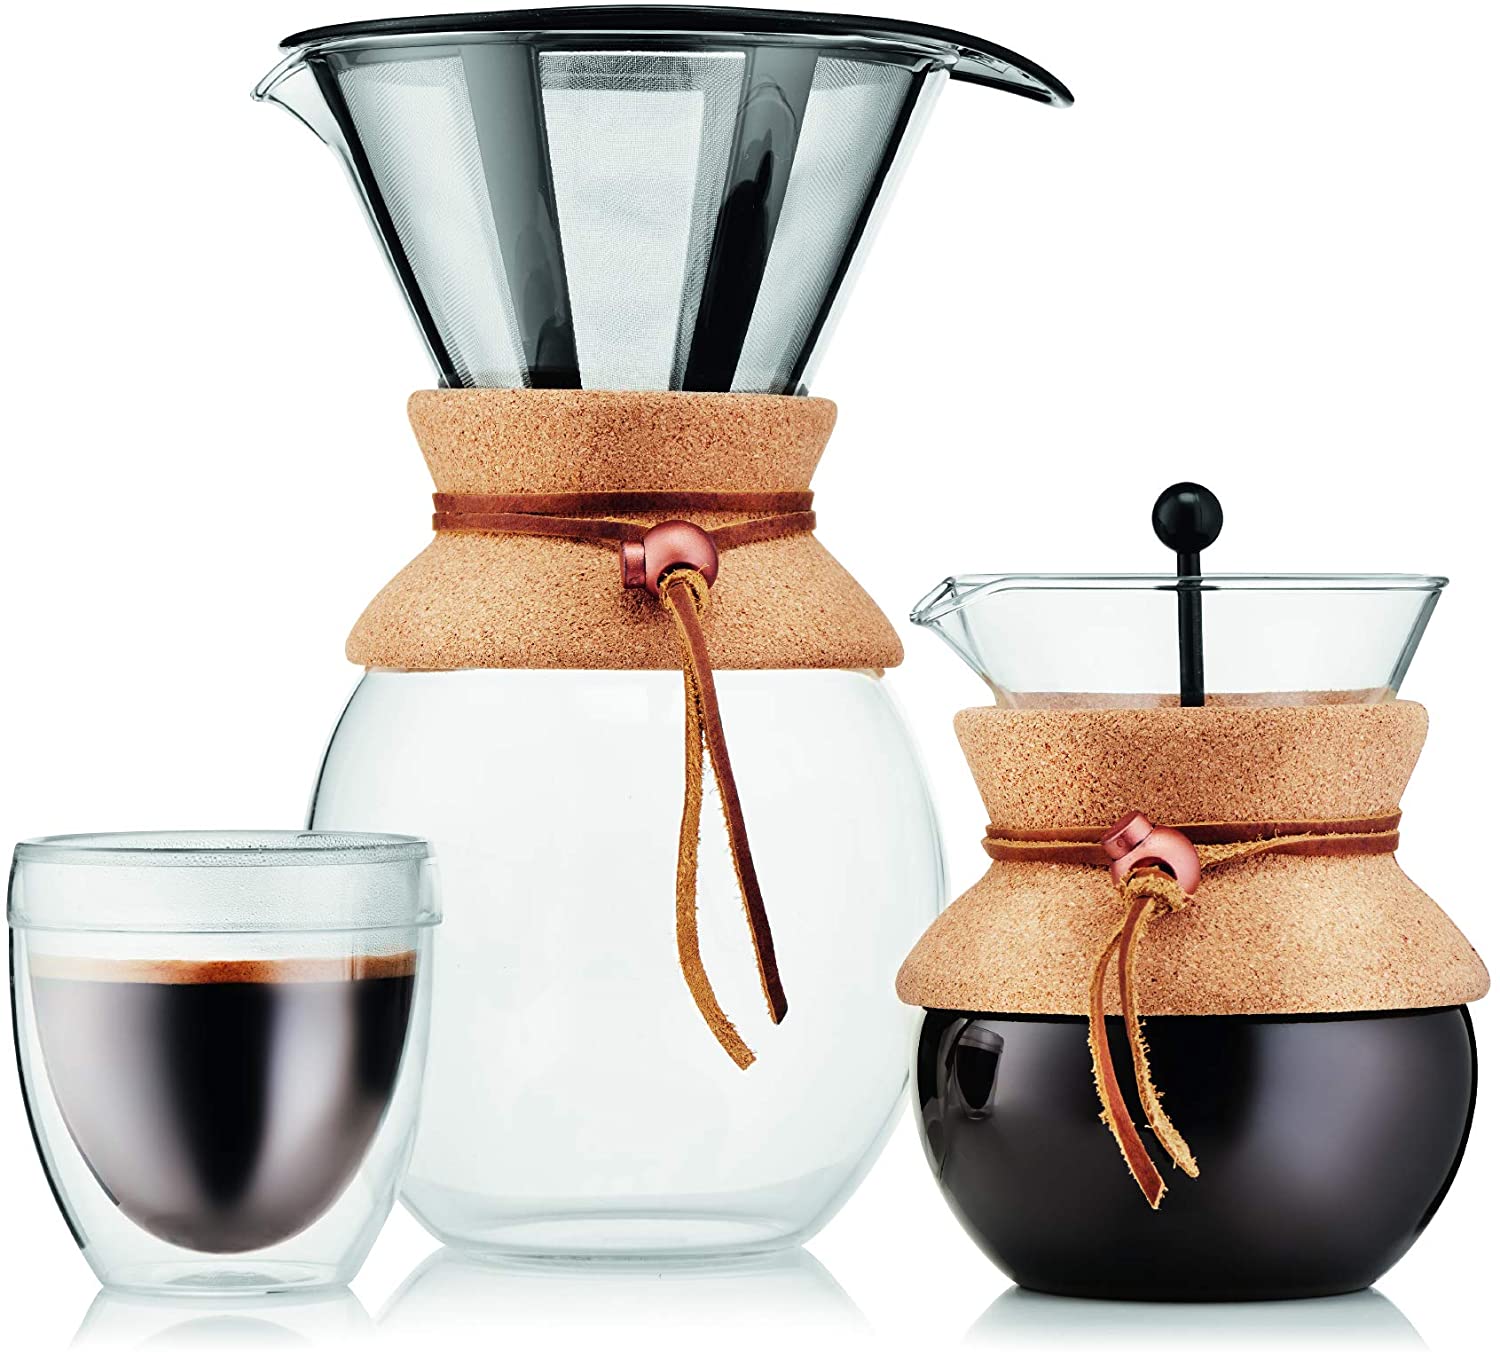 Bodum Pour Over Coffee Maker with Band [Cork/Black]